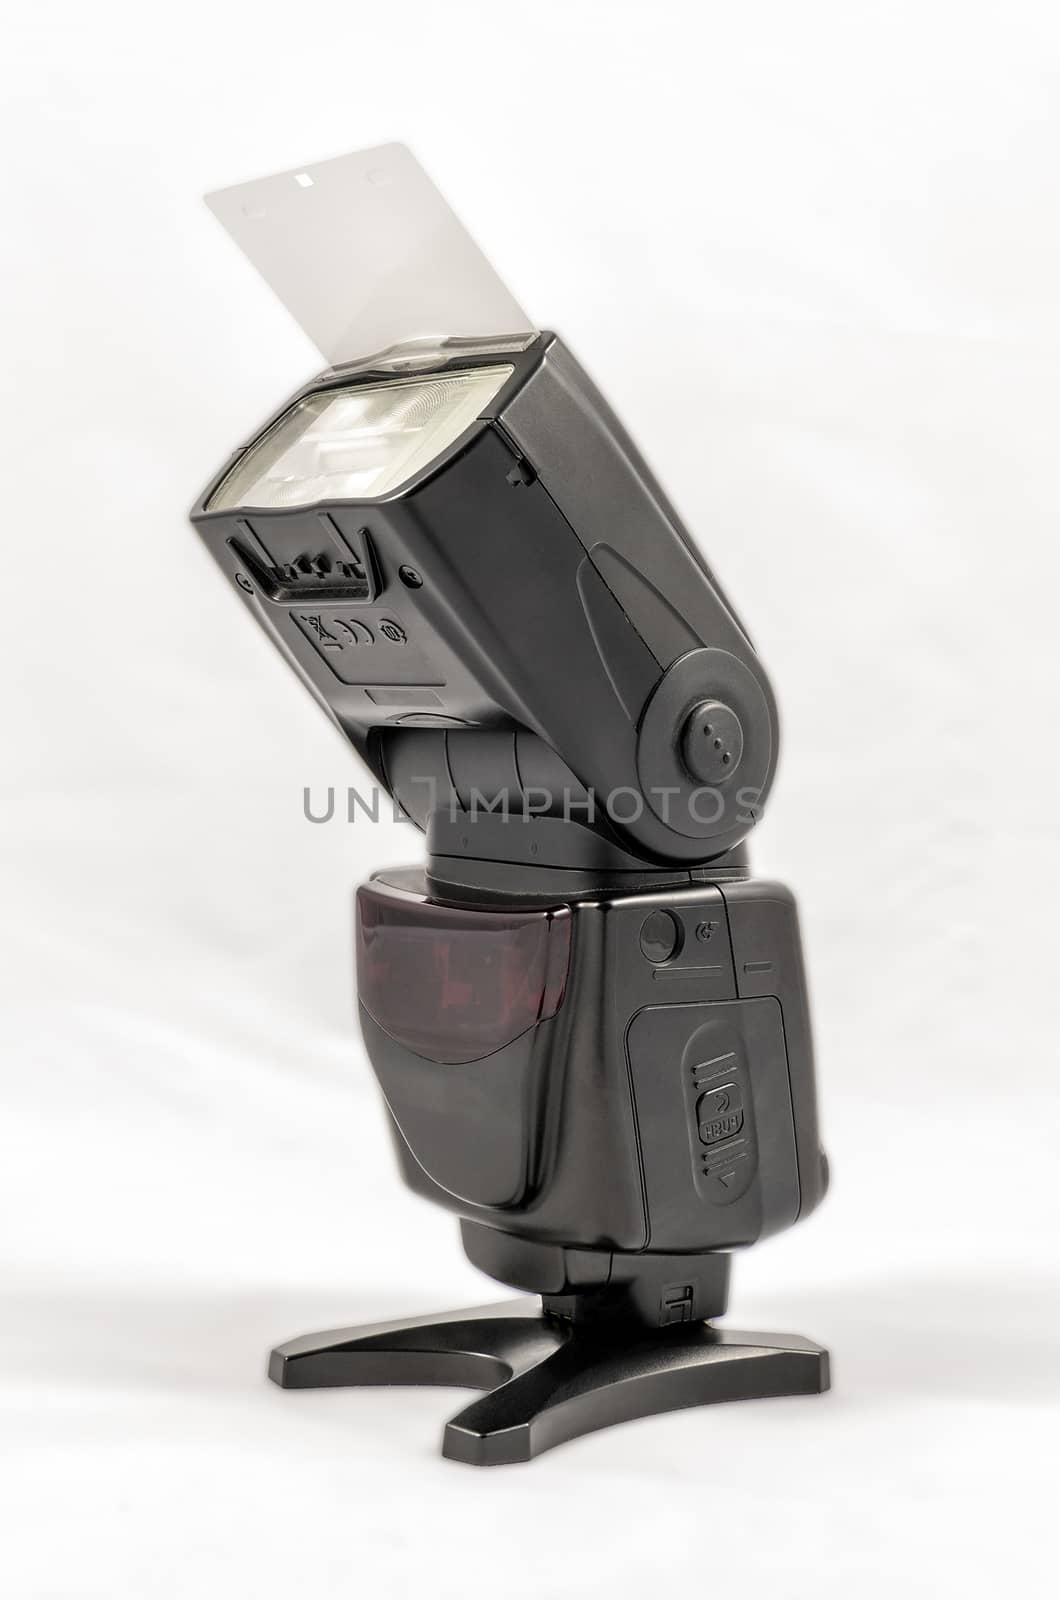 Oblique view of a black unbranded external flash unit for DSLR camera with bounce card extended